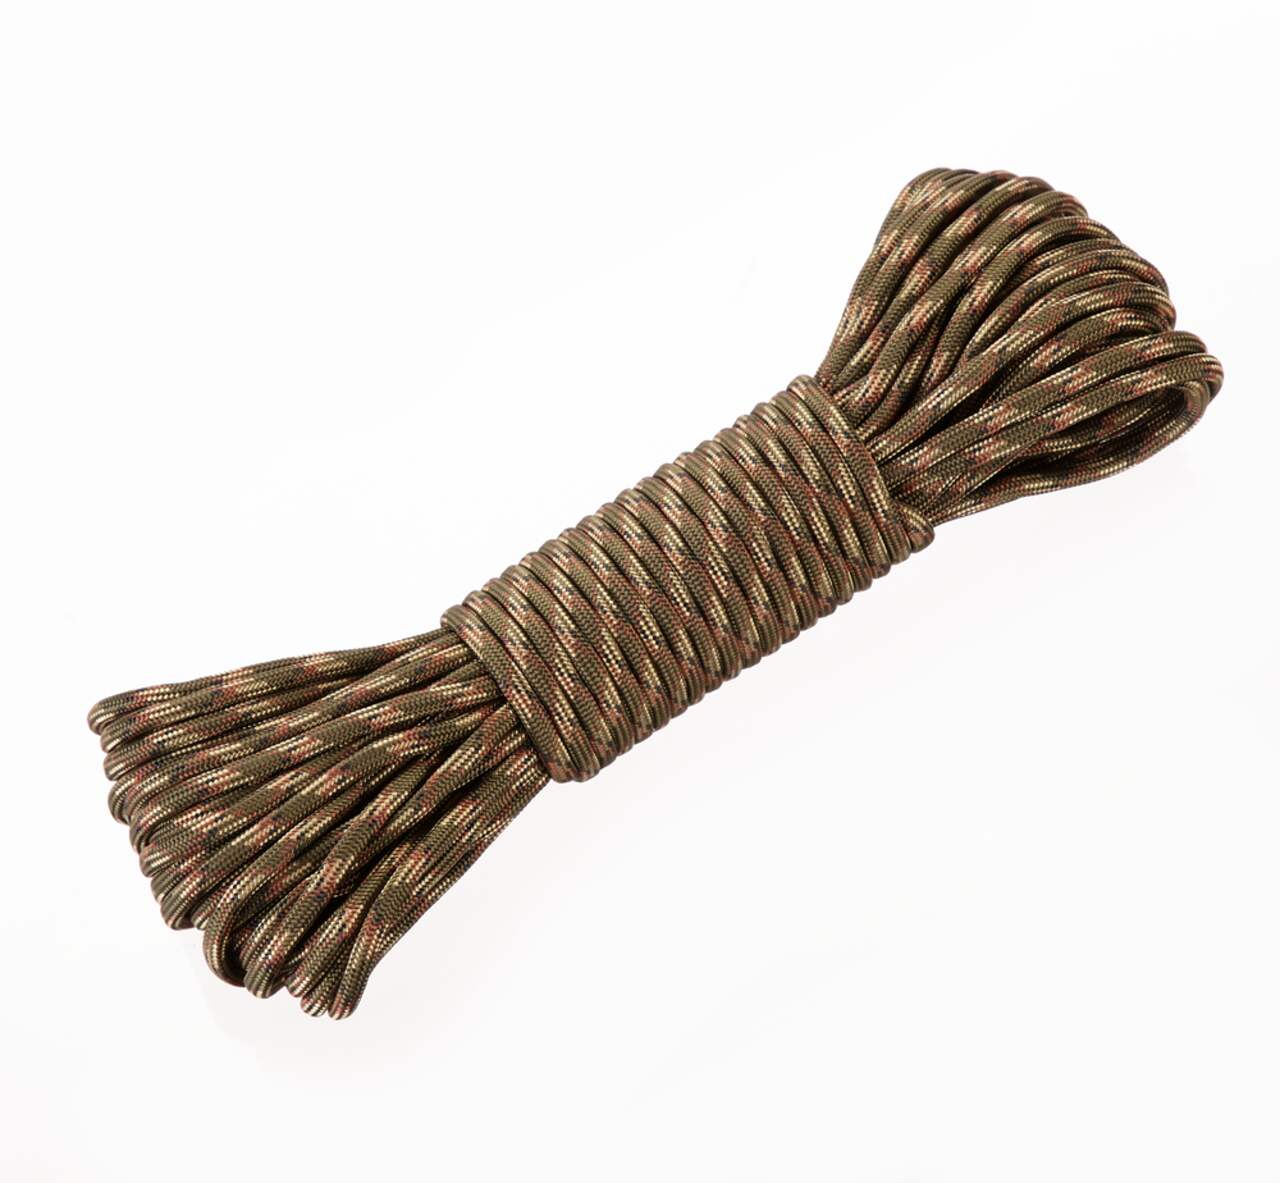 Woods Camping Fire Starter Rope, 550 Nylon Paracord Survival Rope